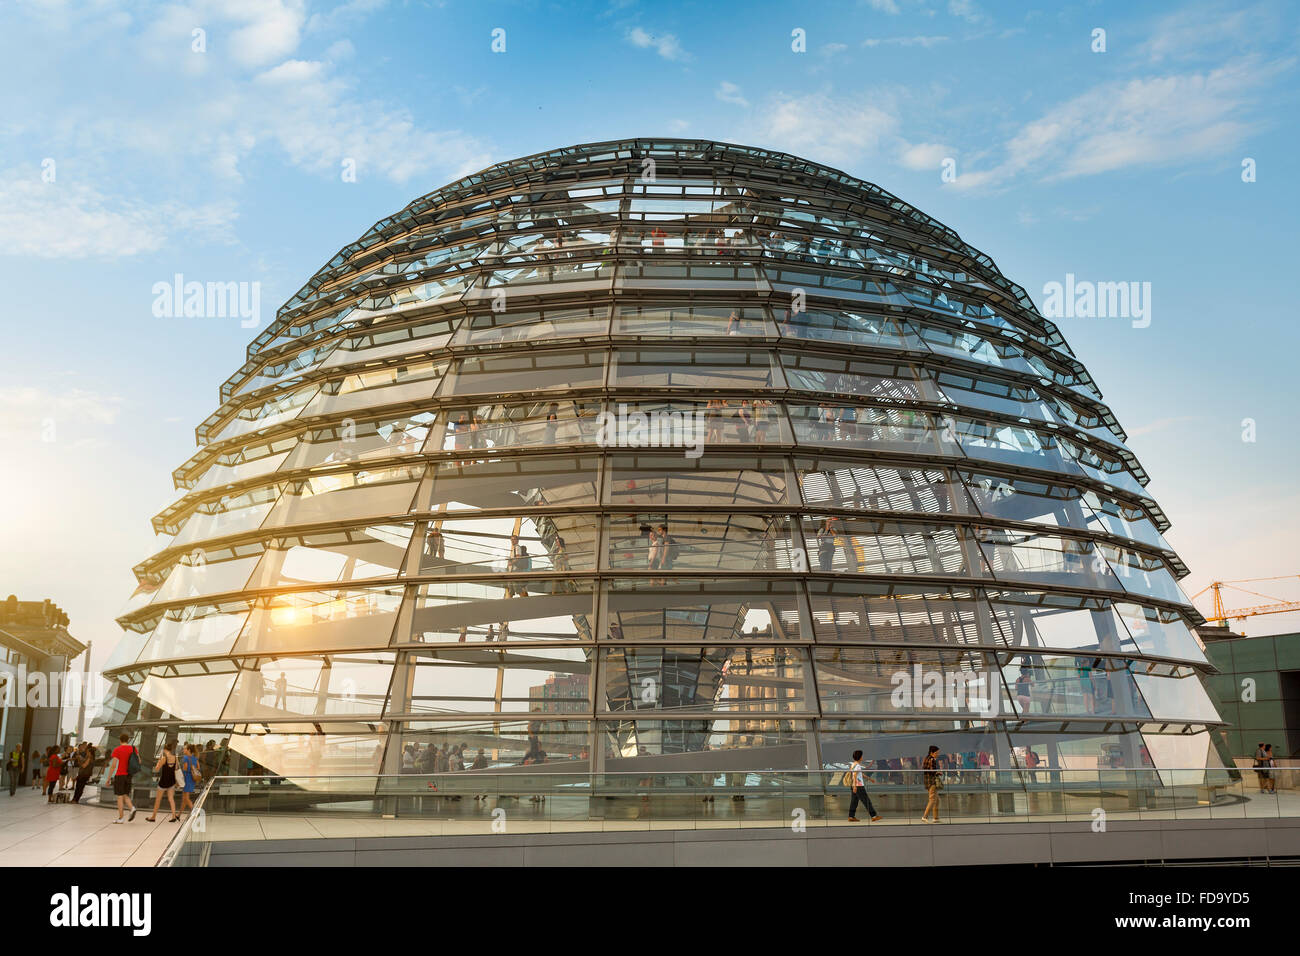 Europe, Germany, Berlin, Norman Foster's Dome of the Reichstag Building Stock Photo